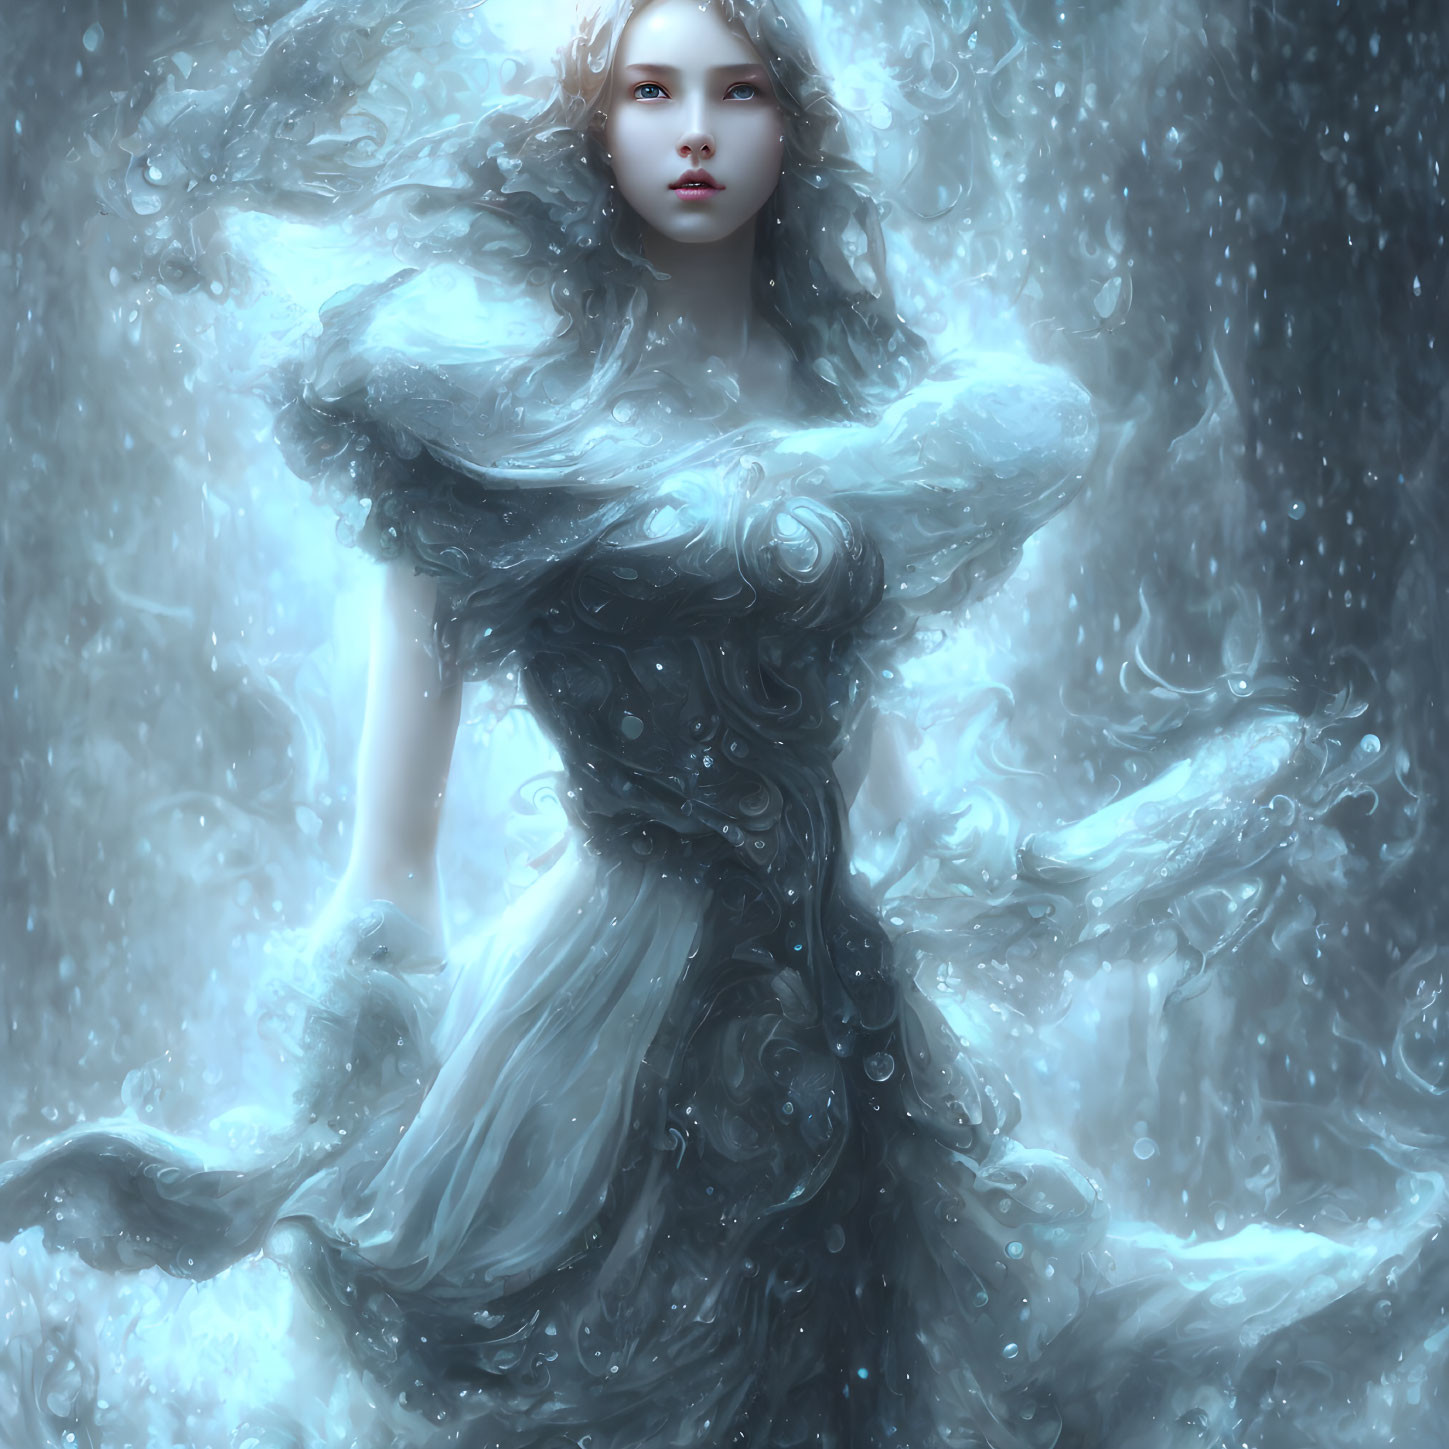 Woman in elegant dress surrounded by magical ice and snow swirls